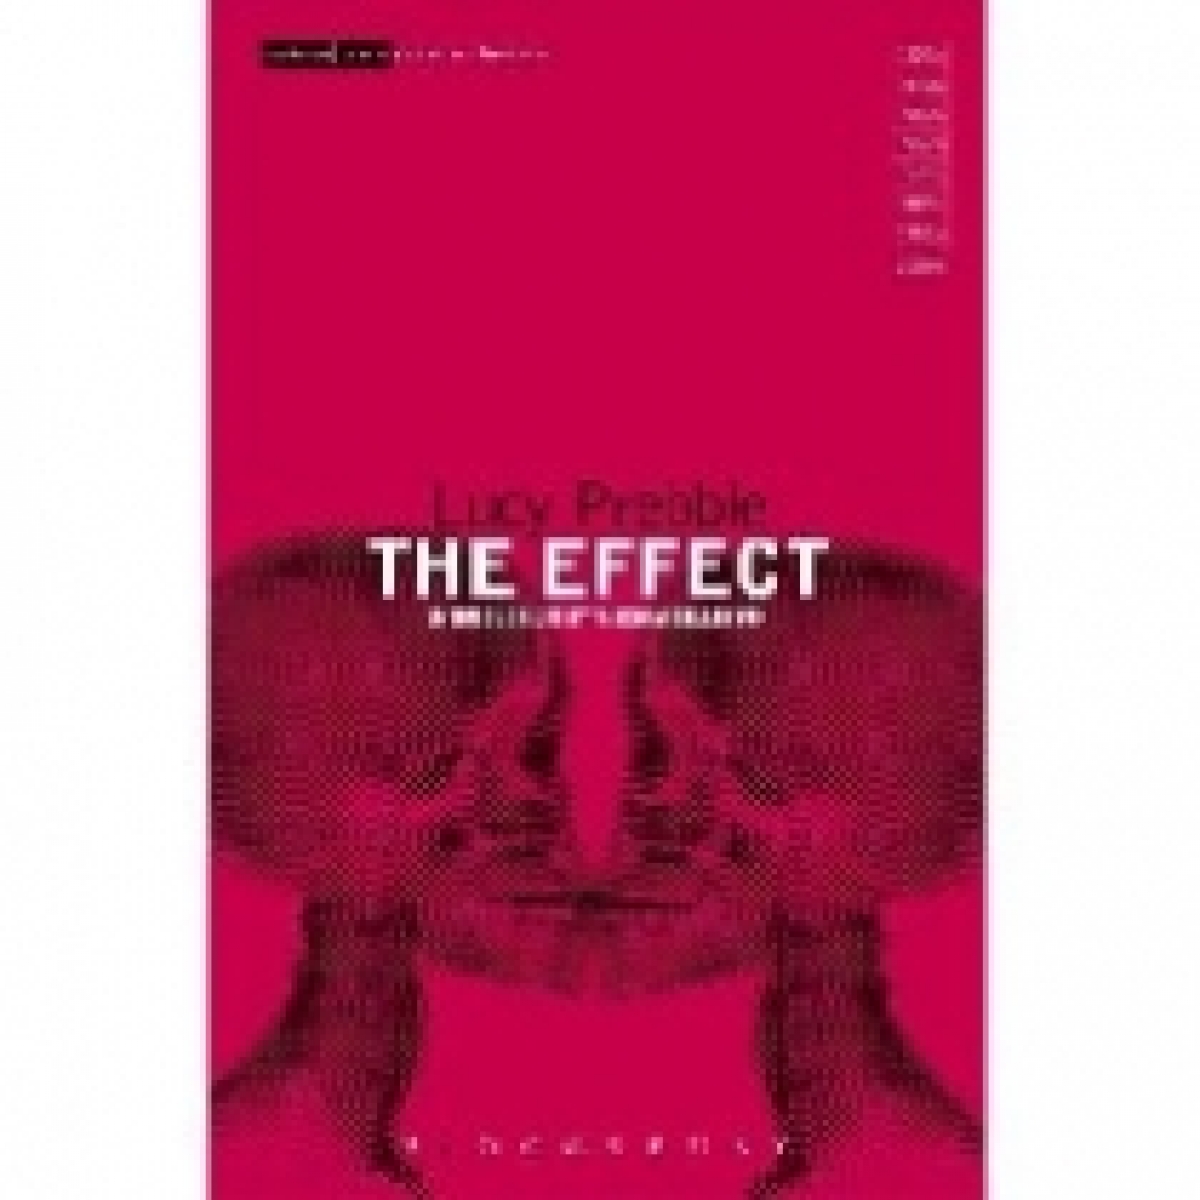 Lucy Prebble The Effect 